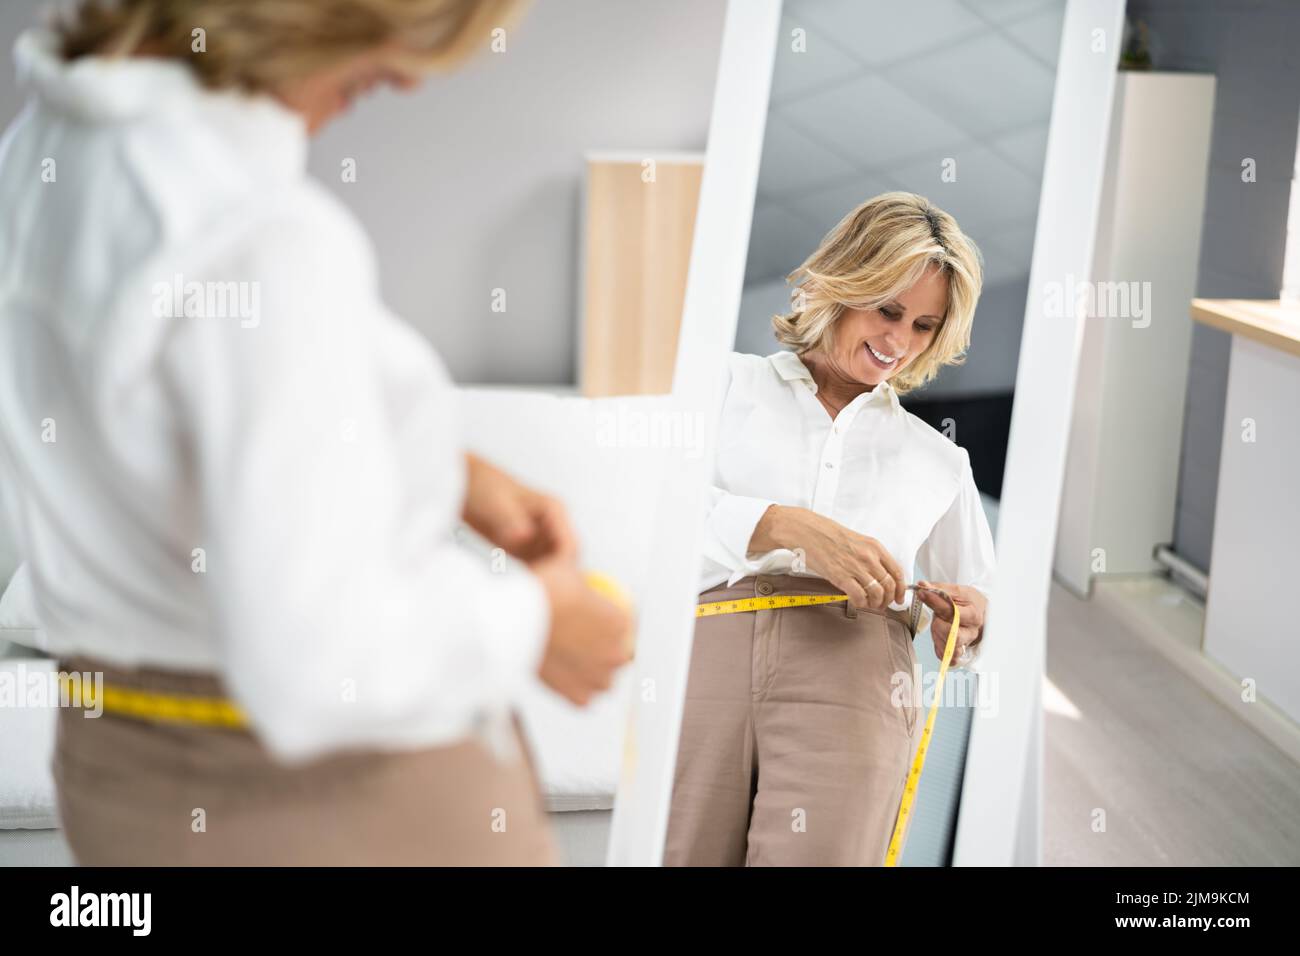 Smiling Slim Woman Looking At Her Reflection In Mirror Stock Photo